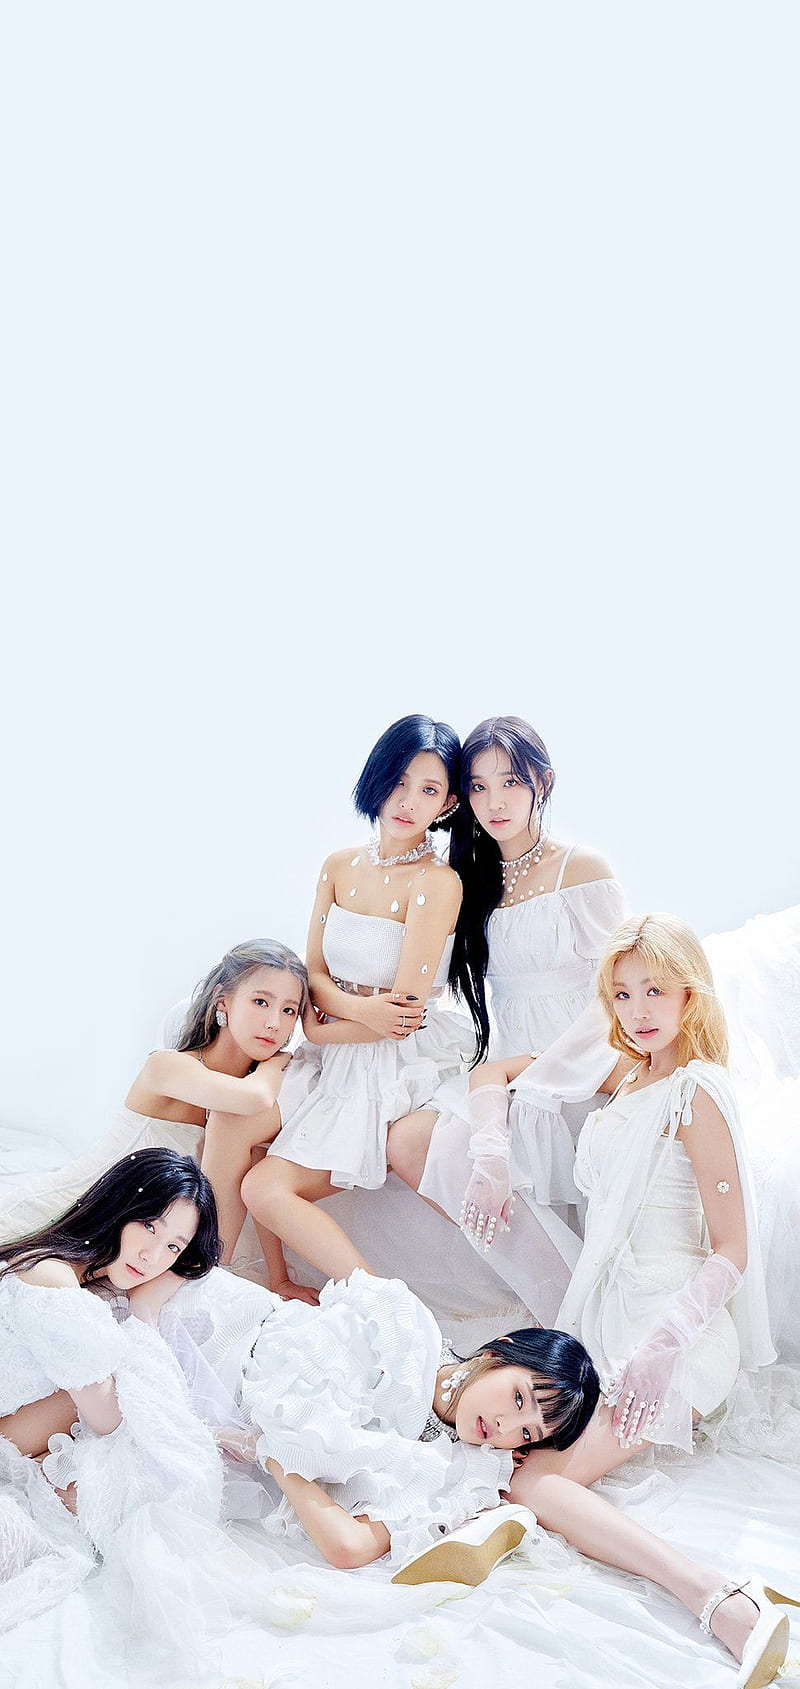 Gidle, oh my god, HD phone wallpaper | Peakpx